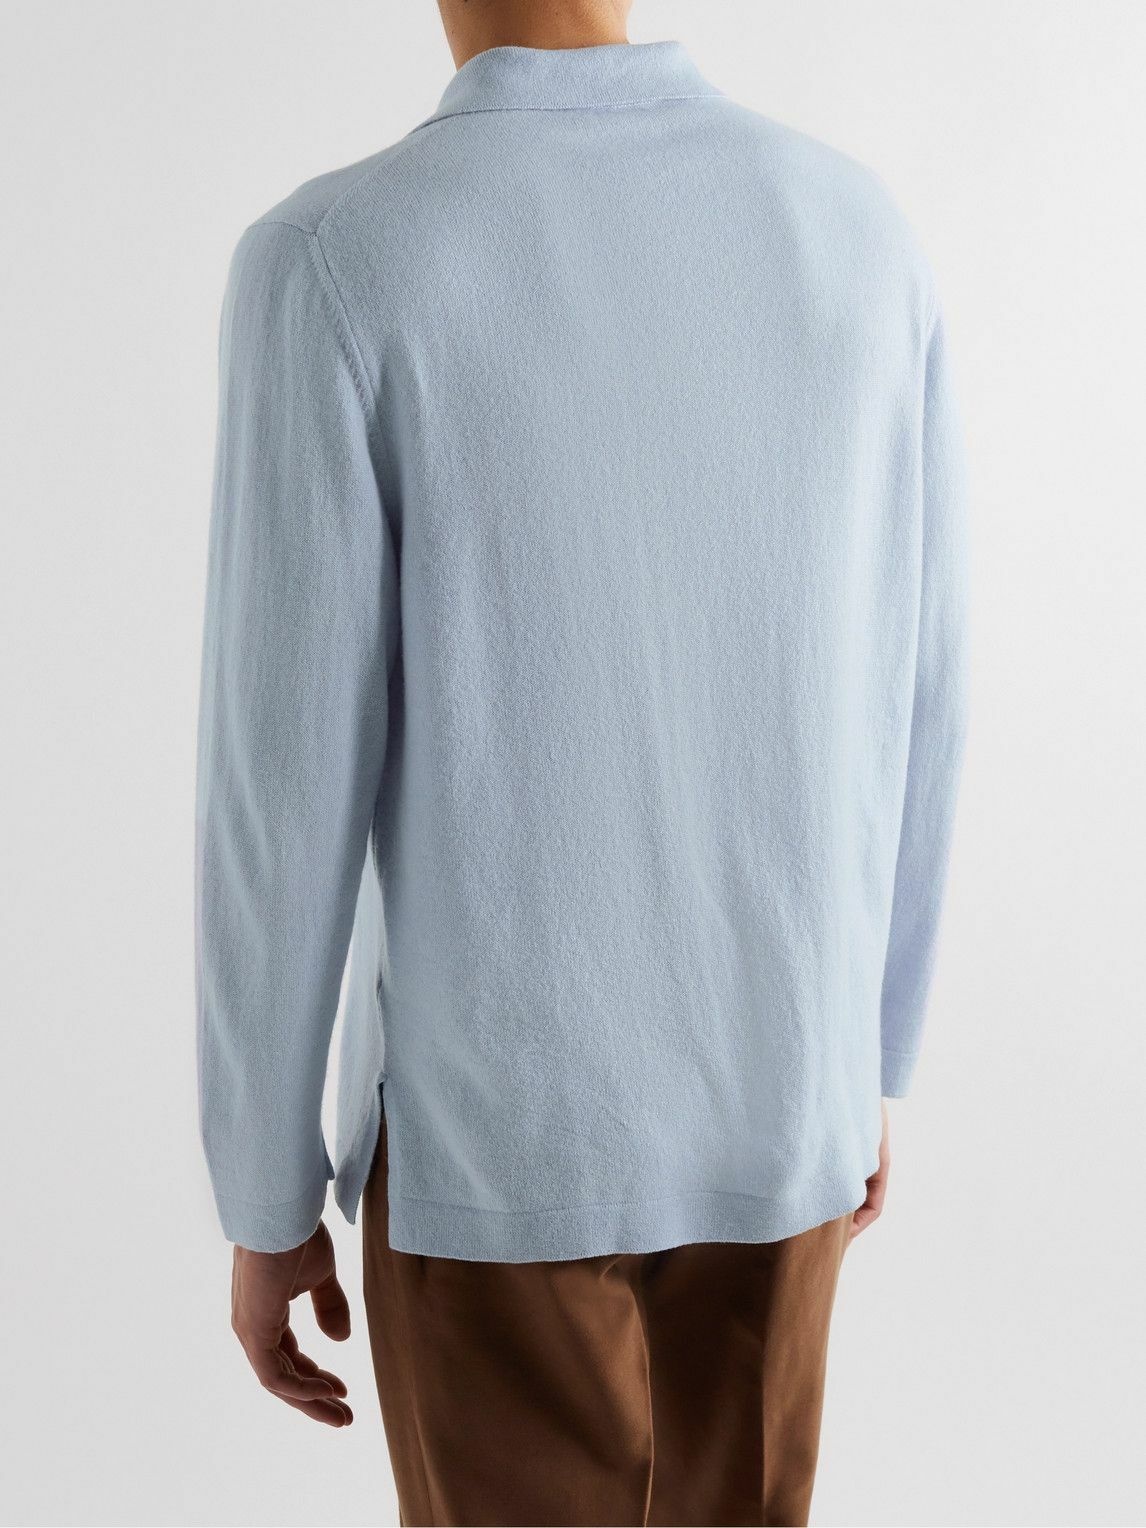 Stoffa - Throwing Fits Cashmere Shirt - Blue